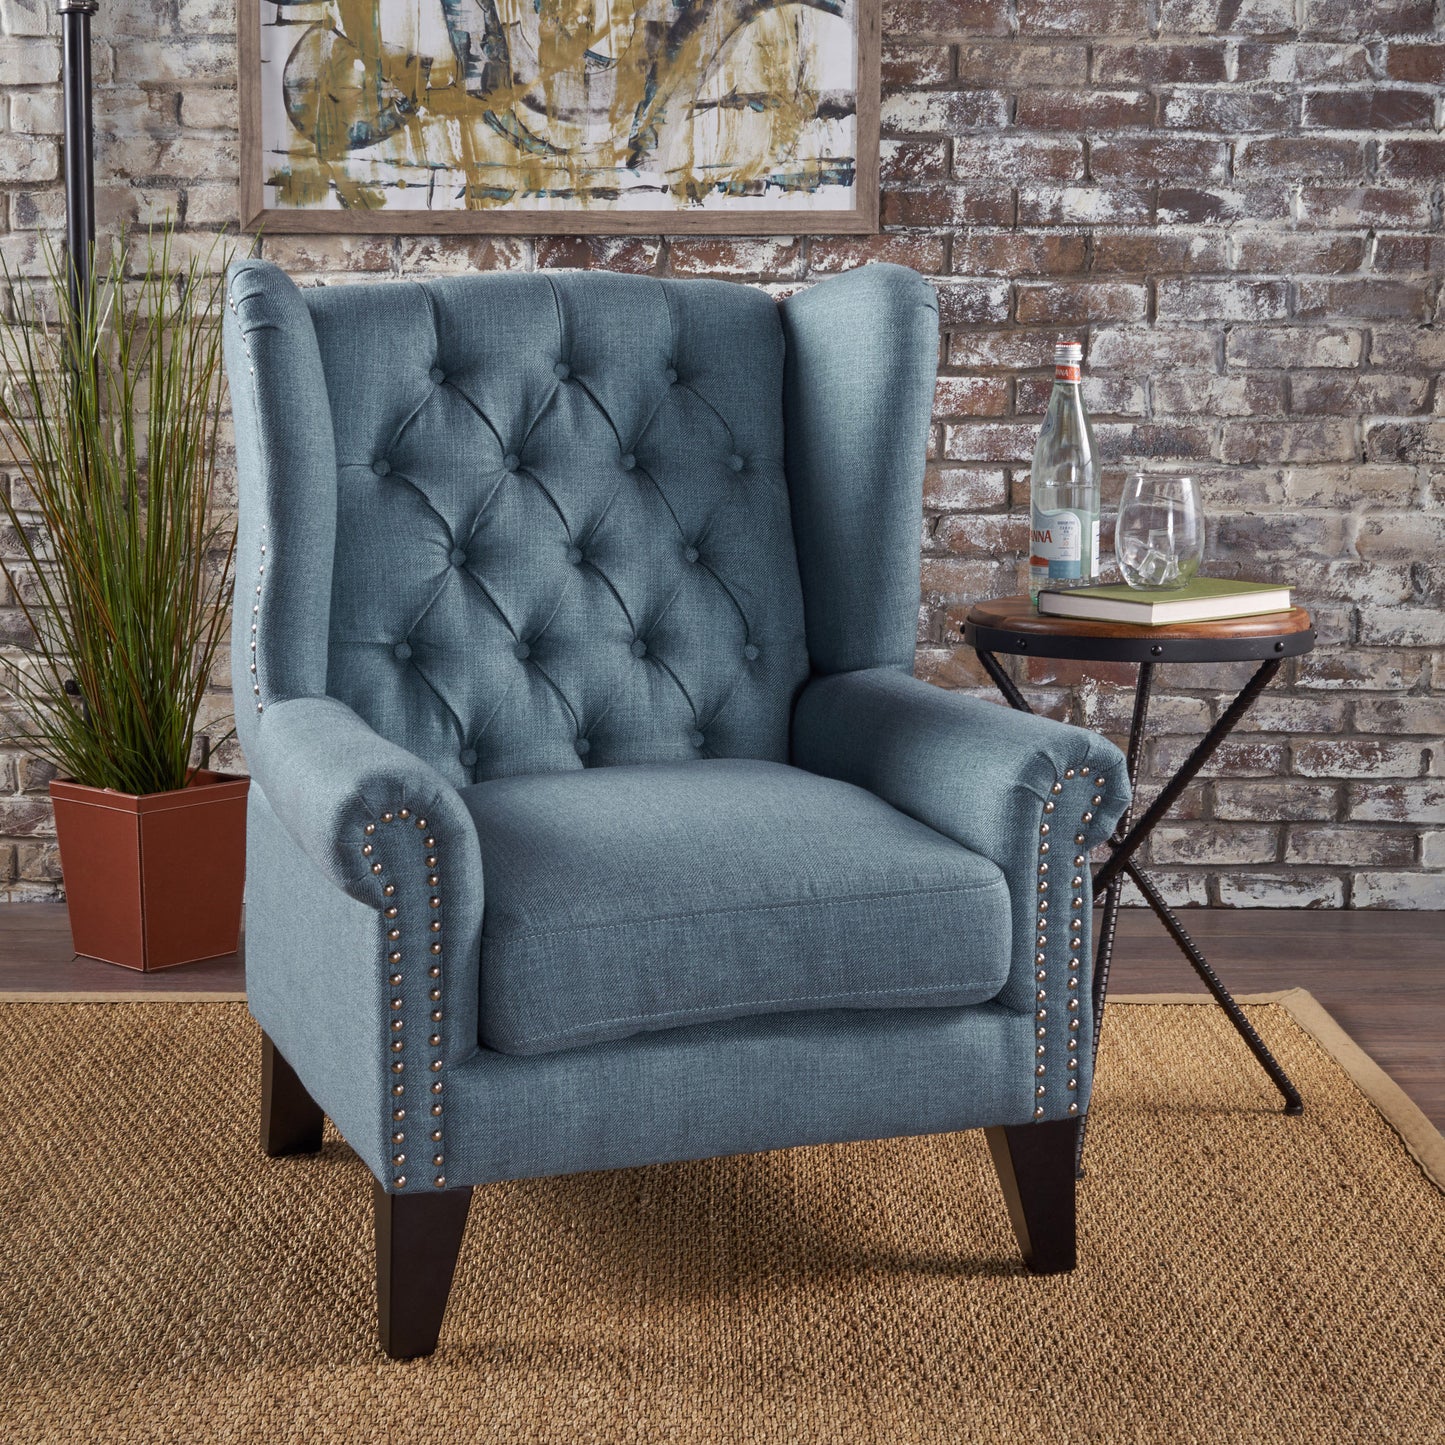 Lainie Traditional Tufted Winged Fabric Accent Chair